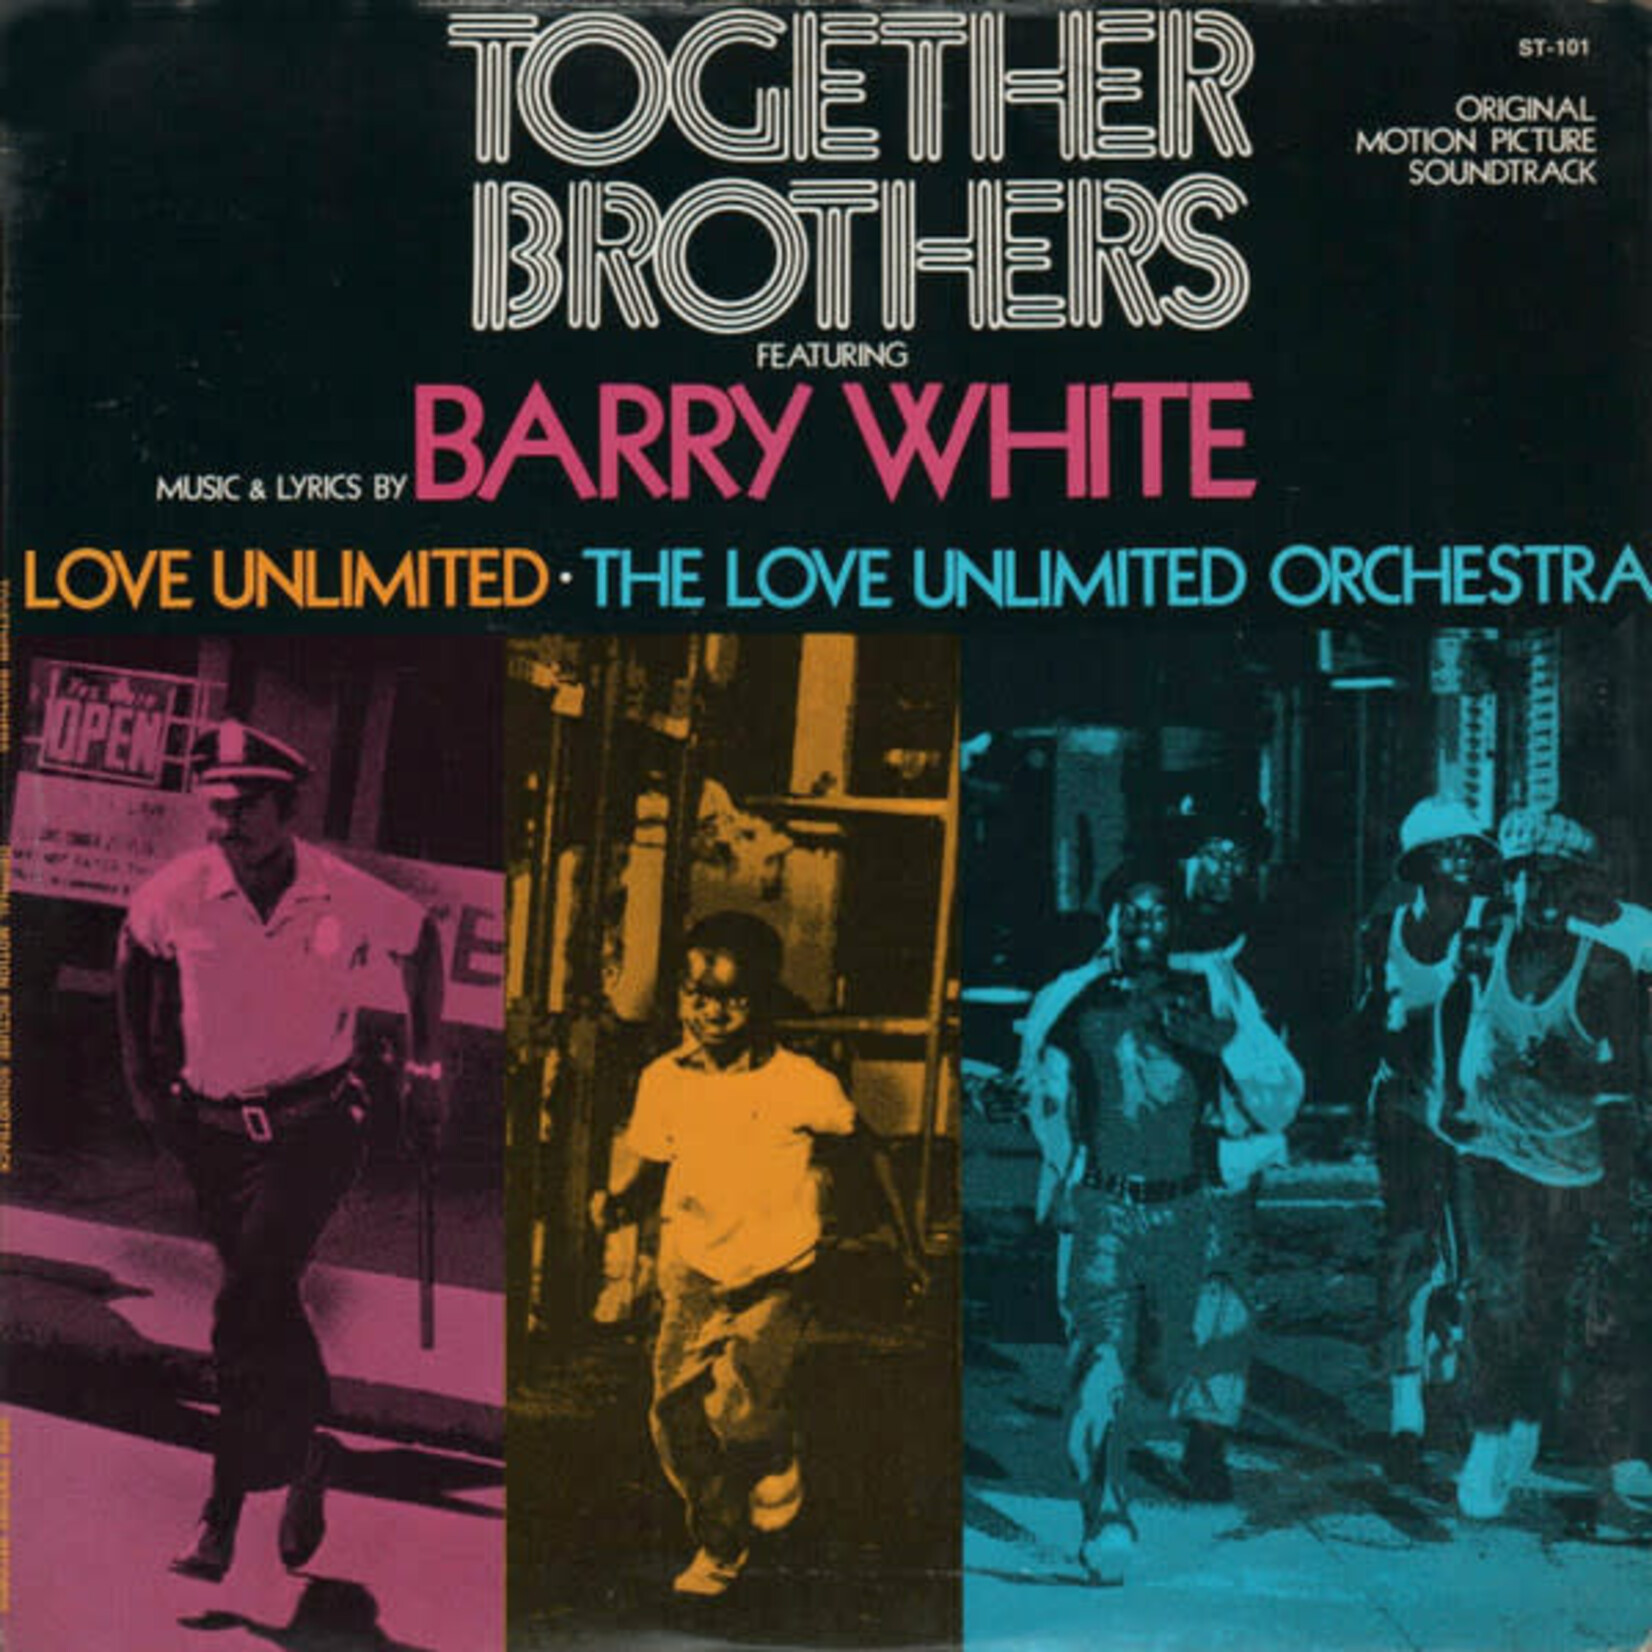 Barry White, Love Unlimited, The Love Unlimited Orchestra – Together Brothers